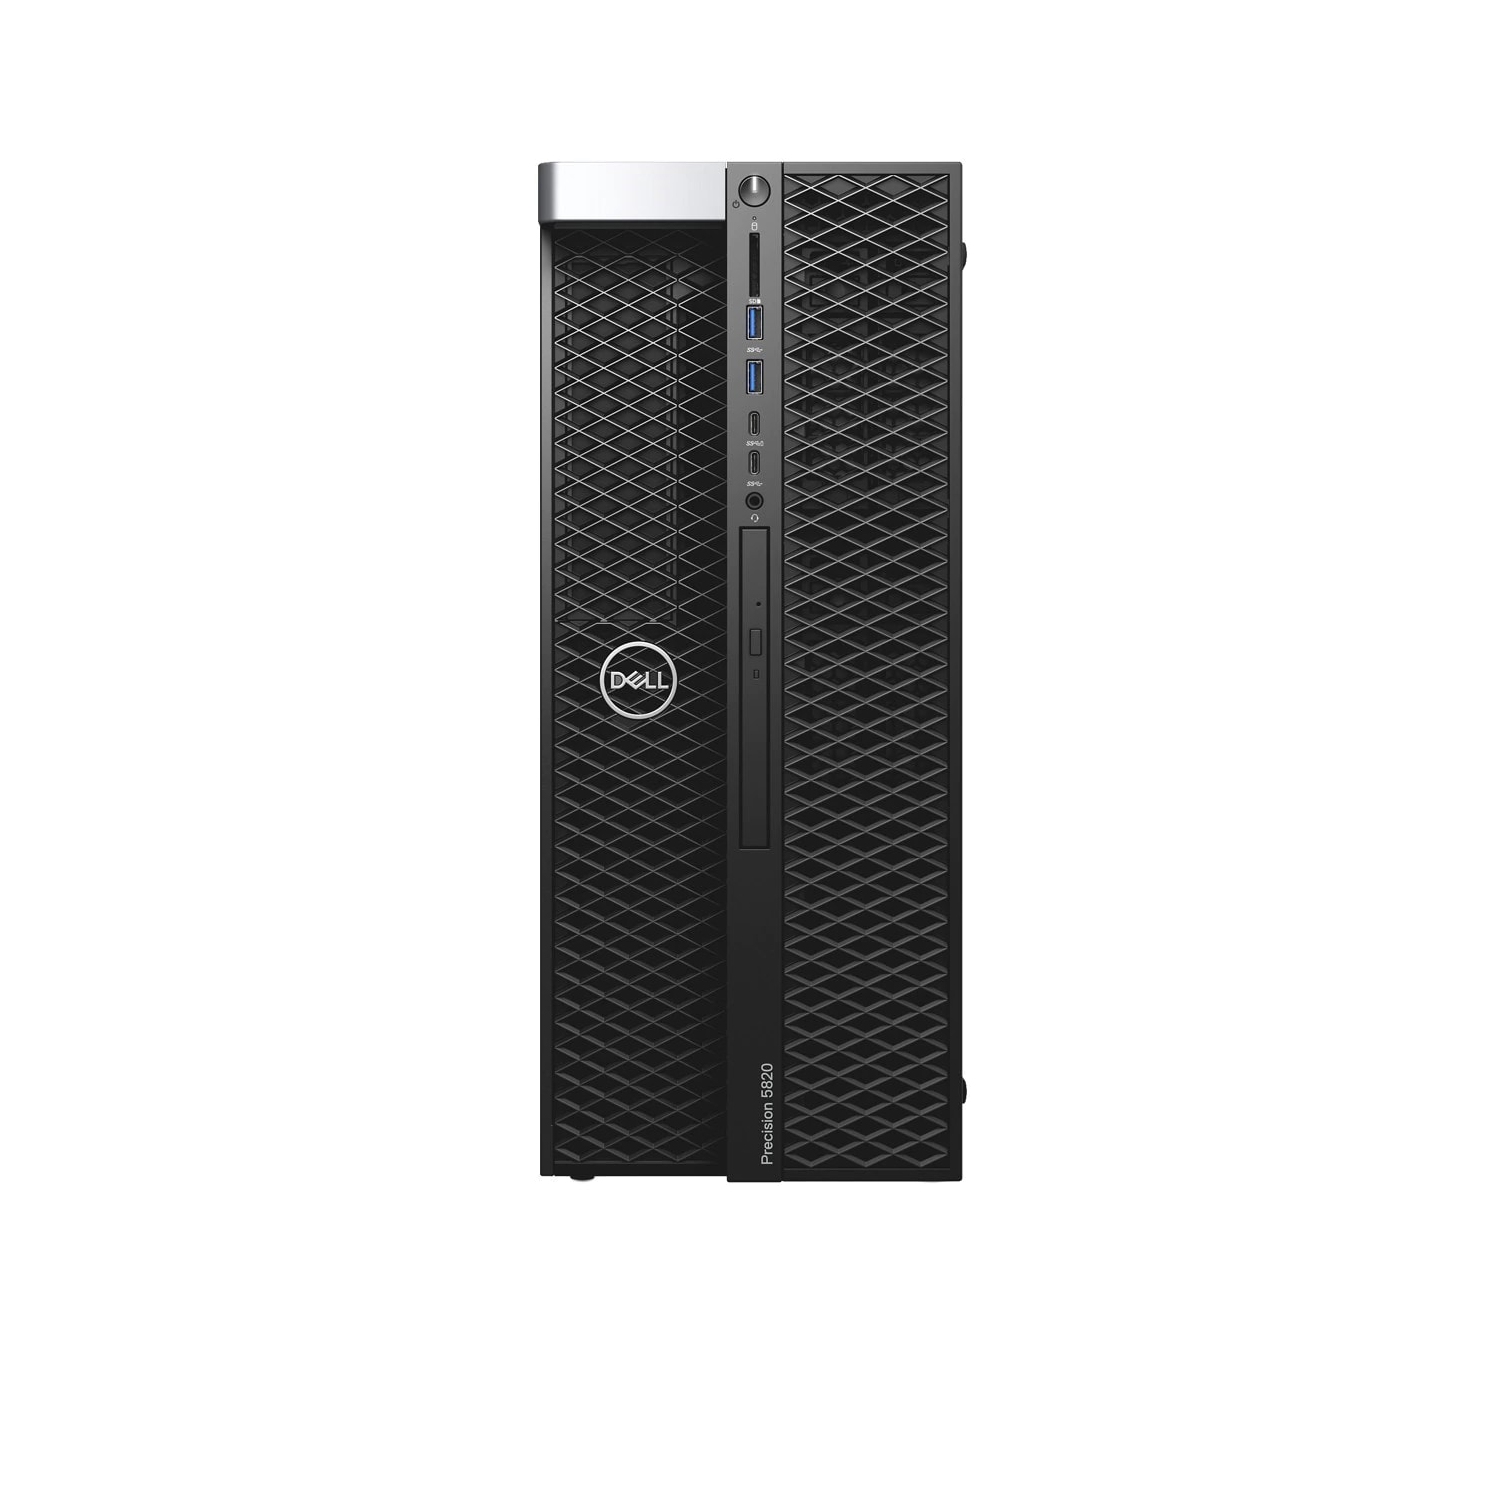 Refurbished (Excellent) - Dell Precision T5820 Workstation Desktop (2018), Core Xeon W, 8TB HDD + 256GB SSD, 32GB RAM, RTX 4000, 10 Cores @ 4.5 GHz Certified Refurbished